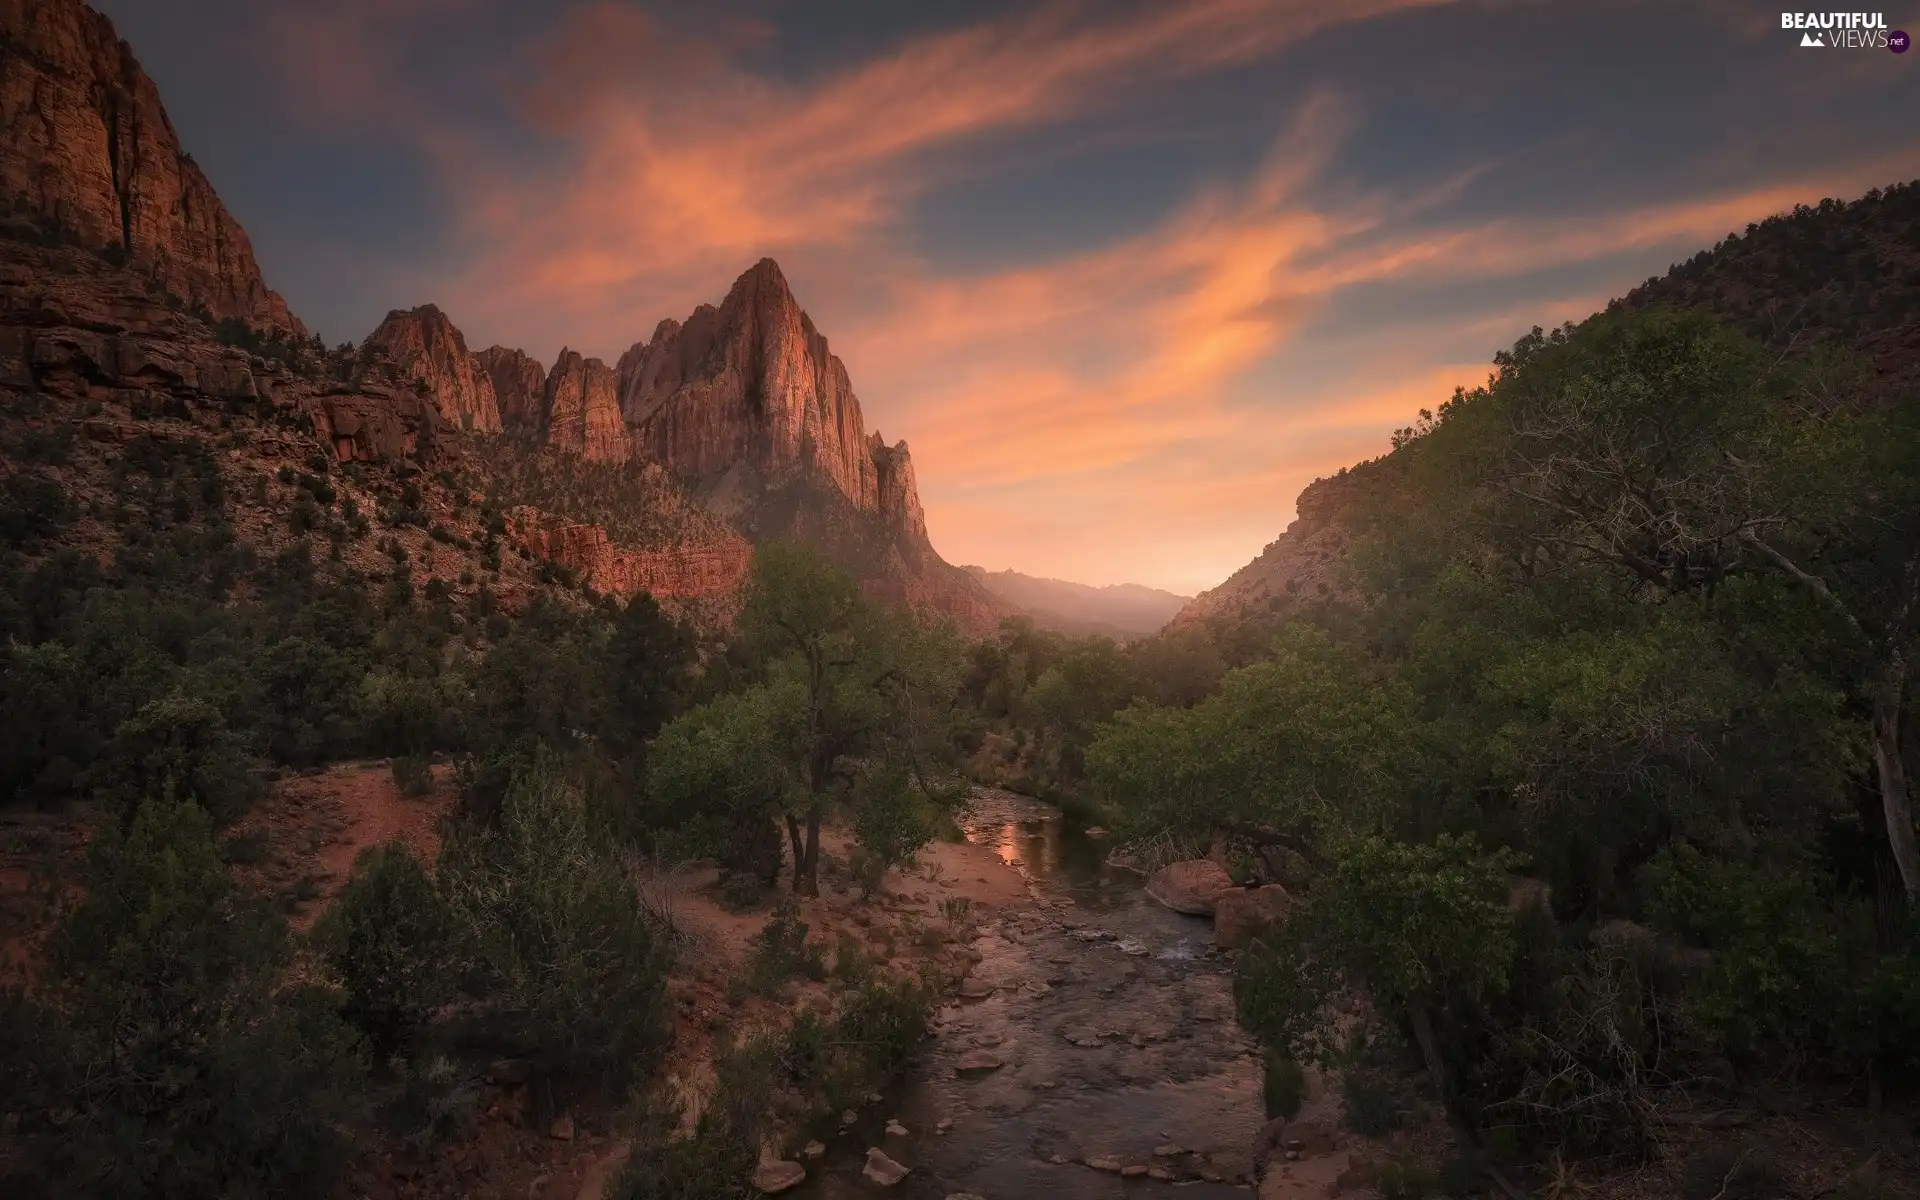 Stones, Zion National Park, viewes, trees, Virgin River, The United States, Great Sunsets, River, Utah, rocks, Mountain Watchman